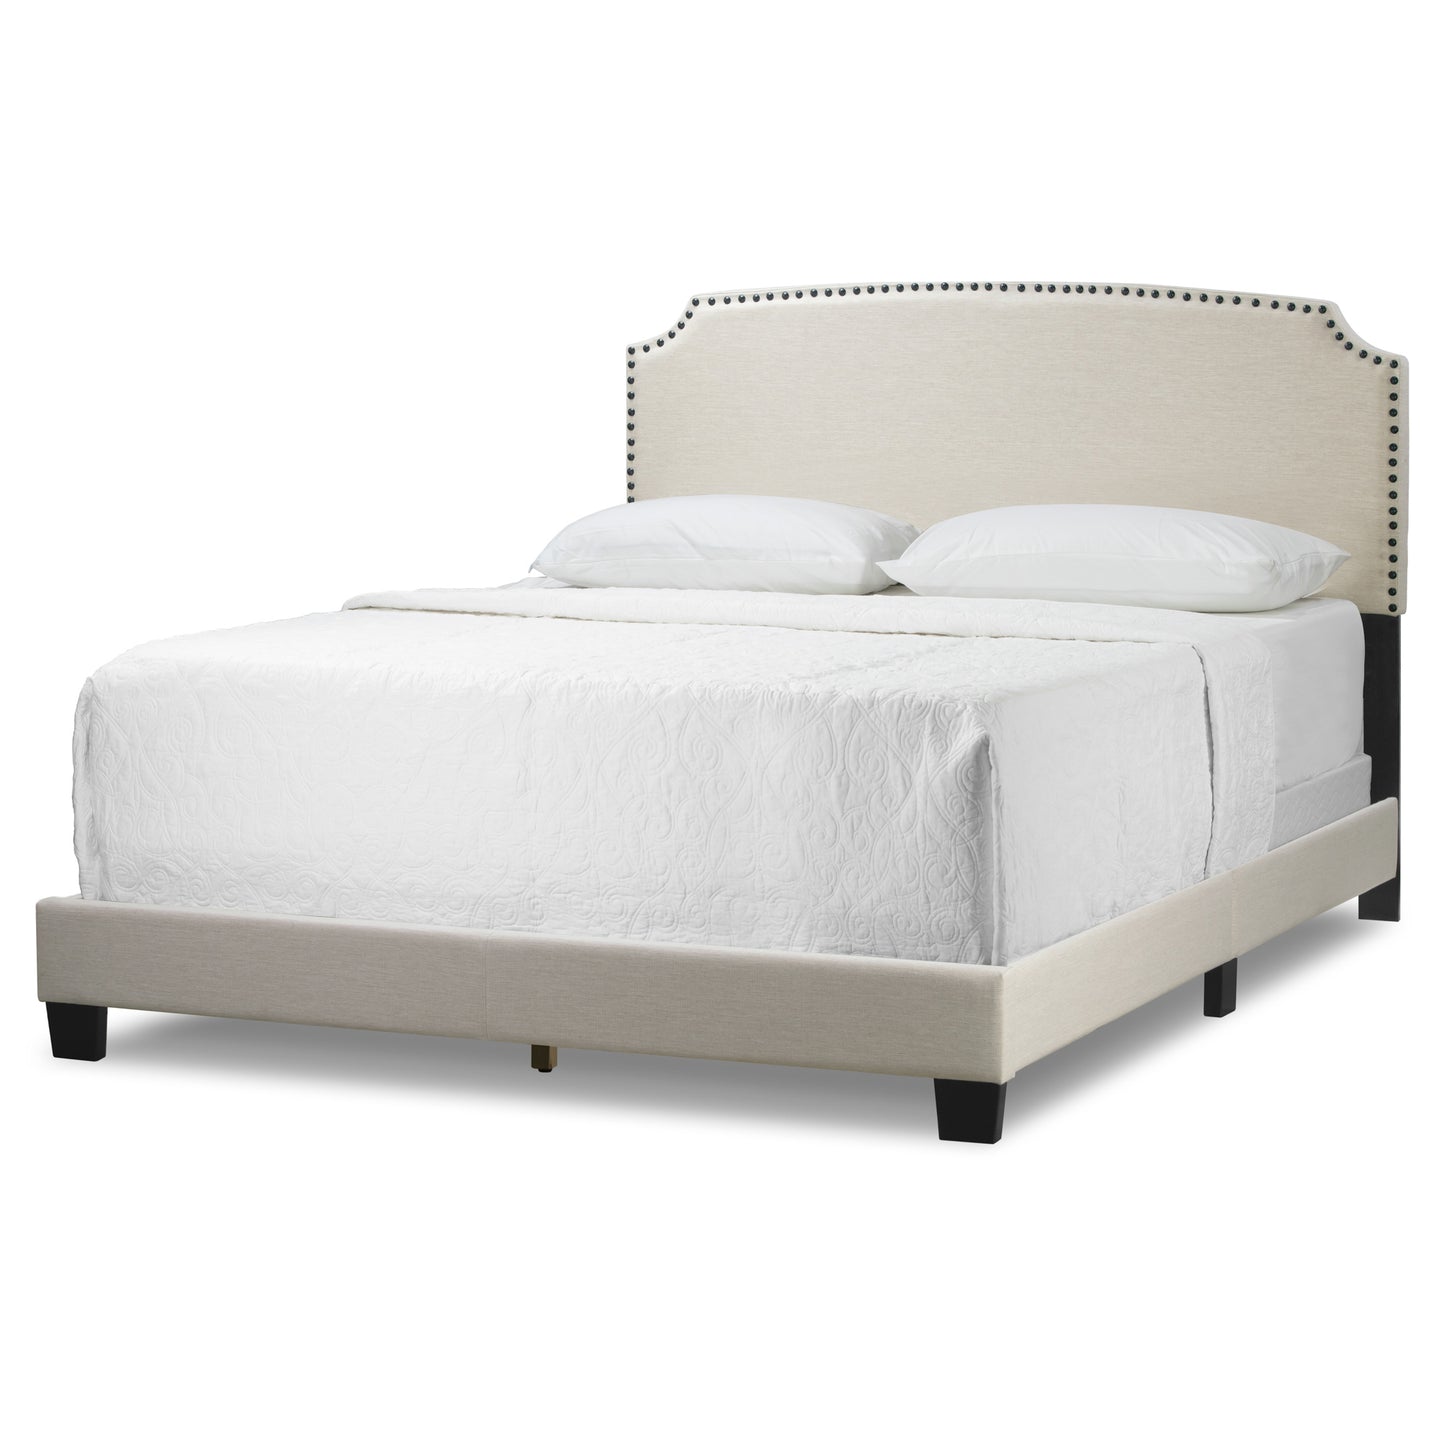 Arezo Beige Fabric Queen Bed with Black Nail Head Trim